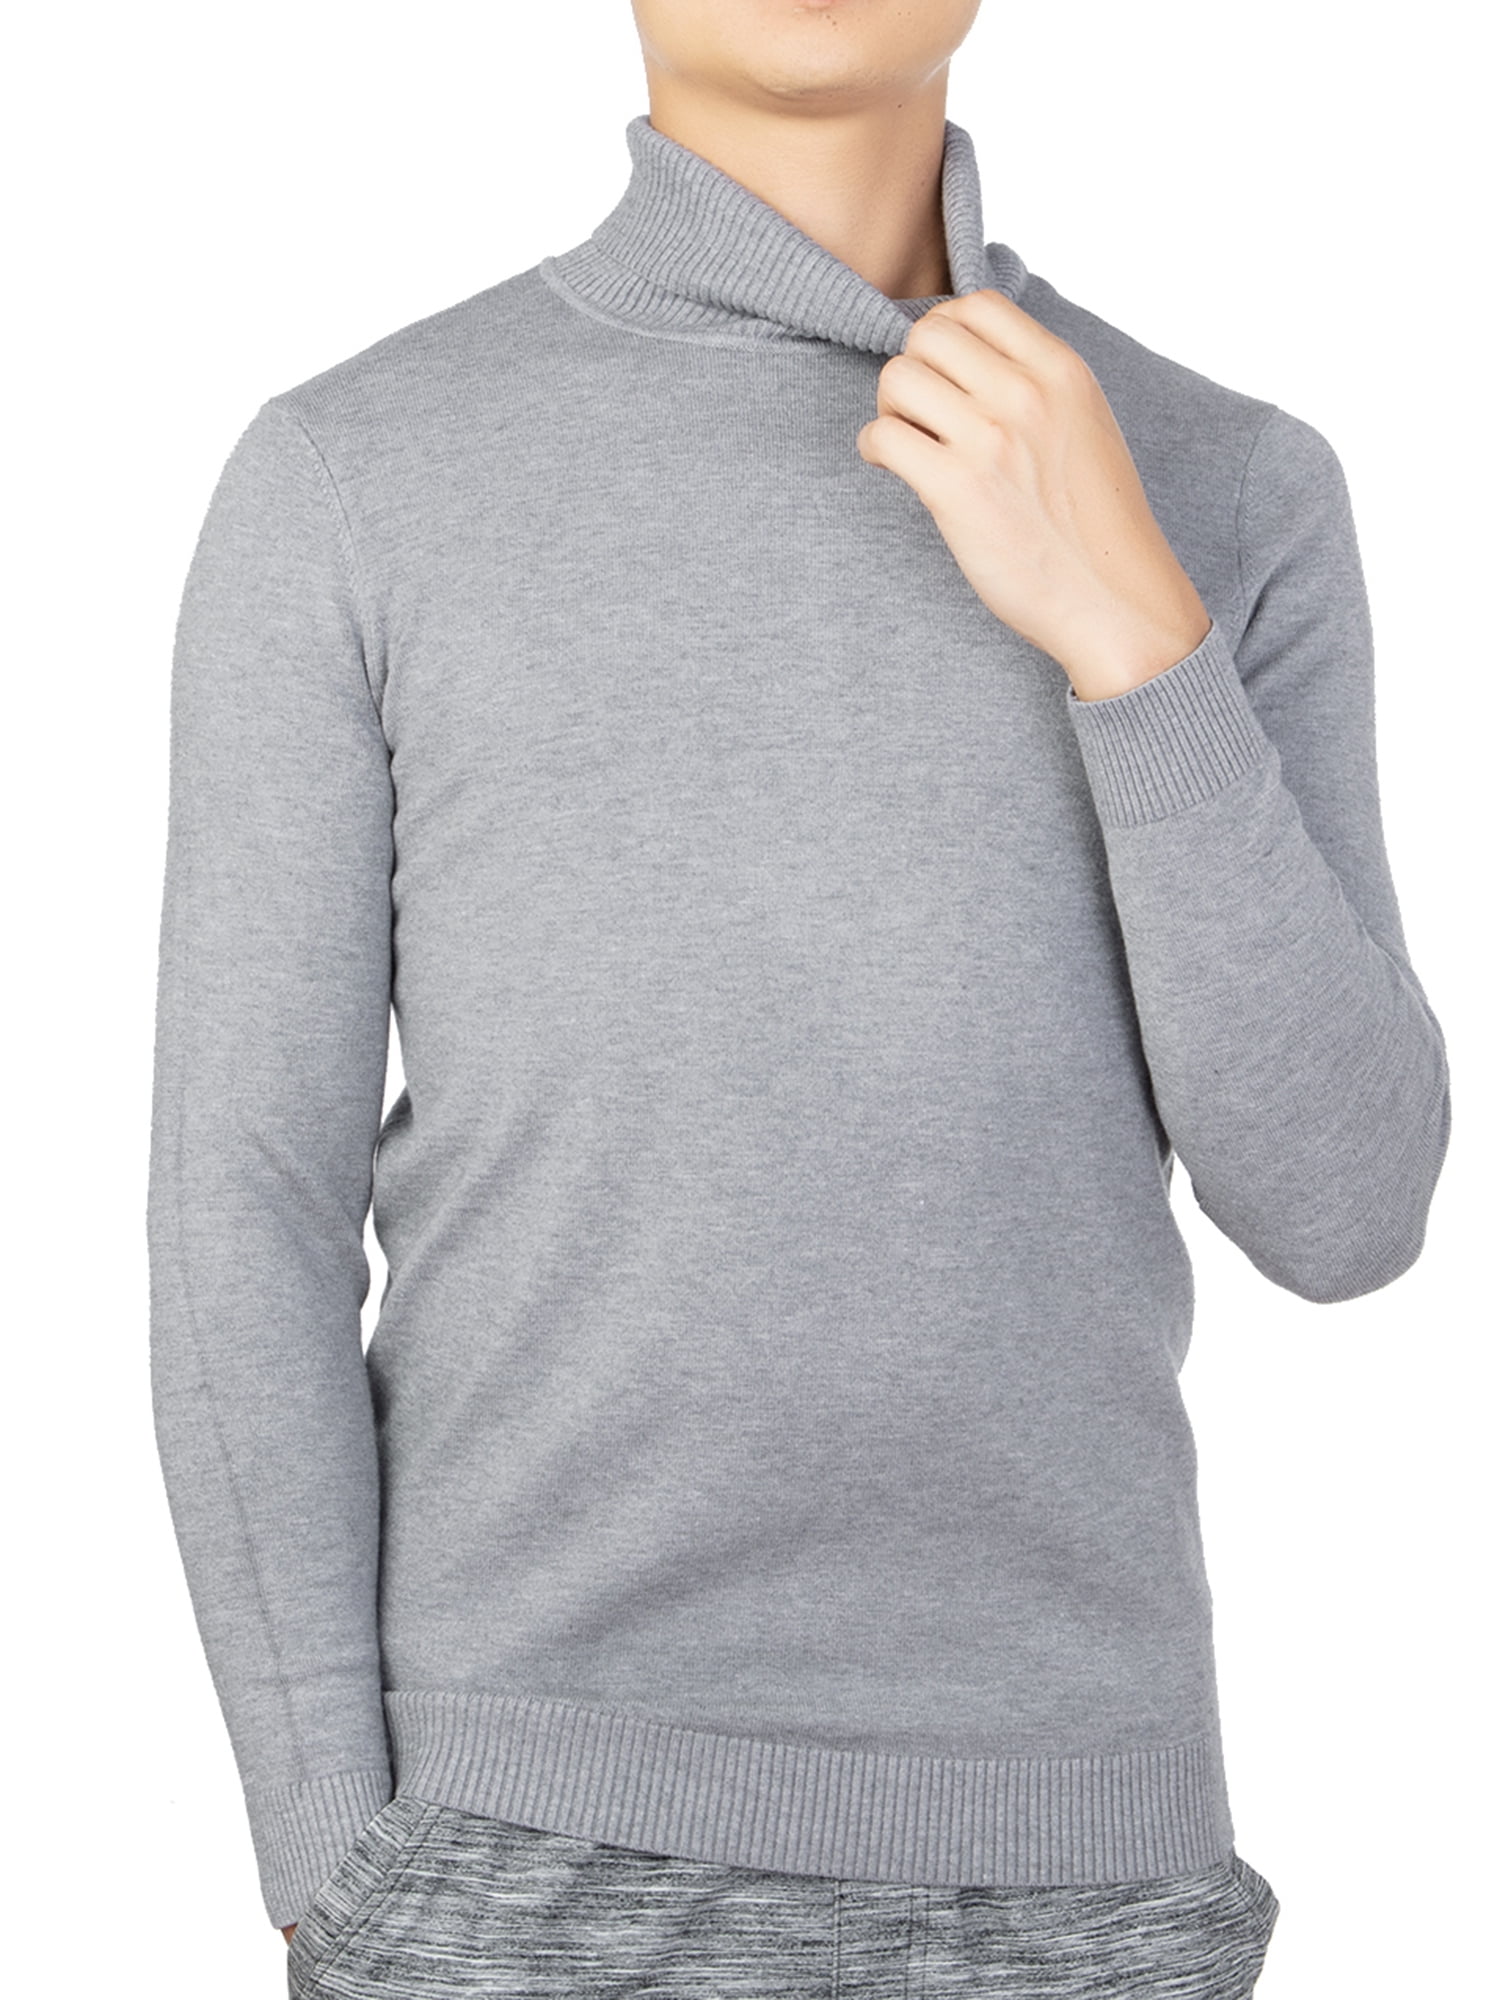 Mengar Mens Casual Basic Thermal Turtleneck T Shirts Roll Neck Pullover Sweaters